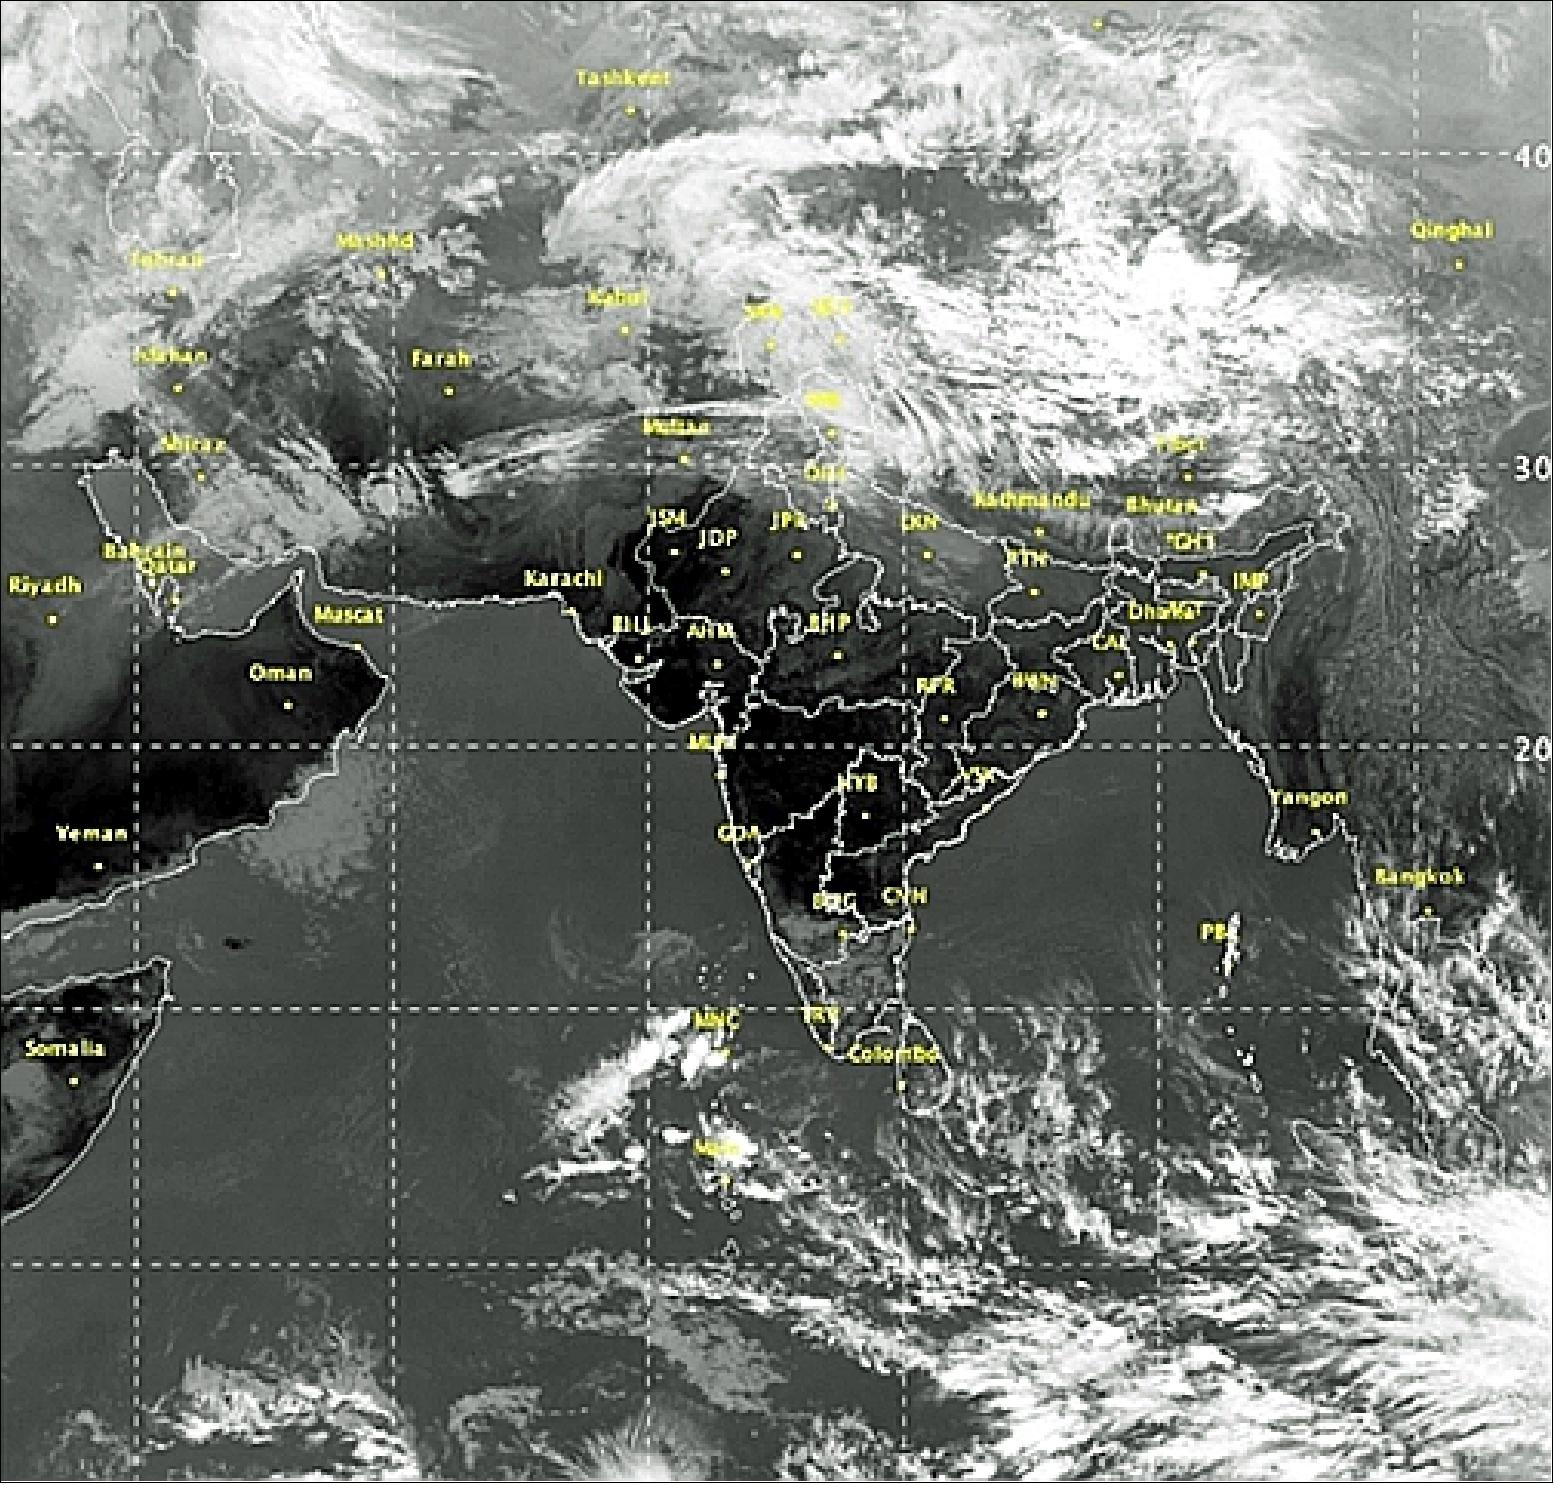 Figure 6: Image acquired by INSAT-3D (image credit: IMD)